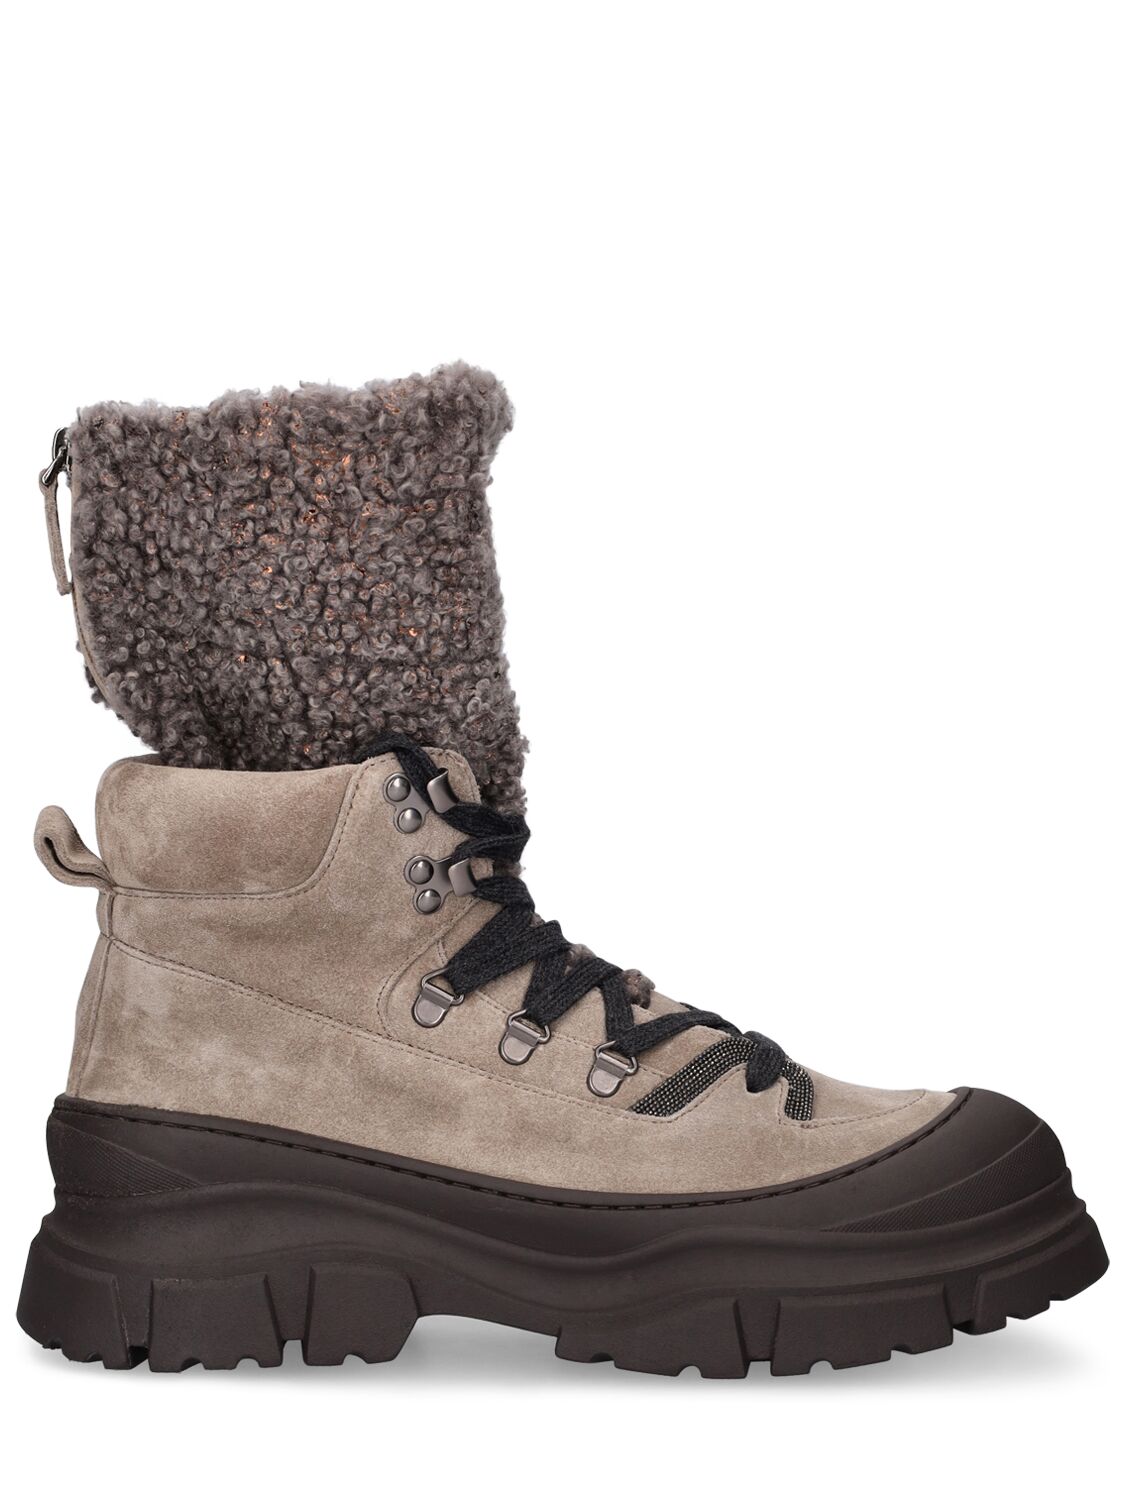 30mm Suede & Shearling Hiking Boots